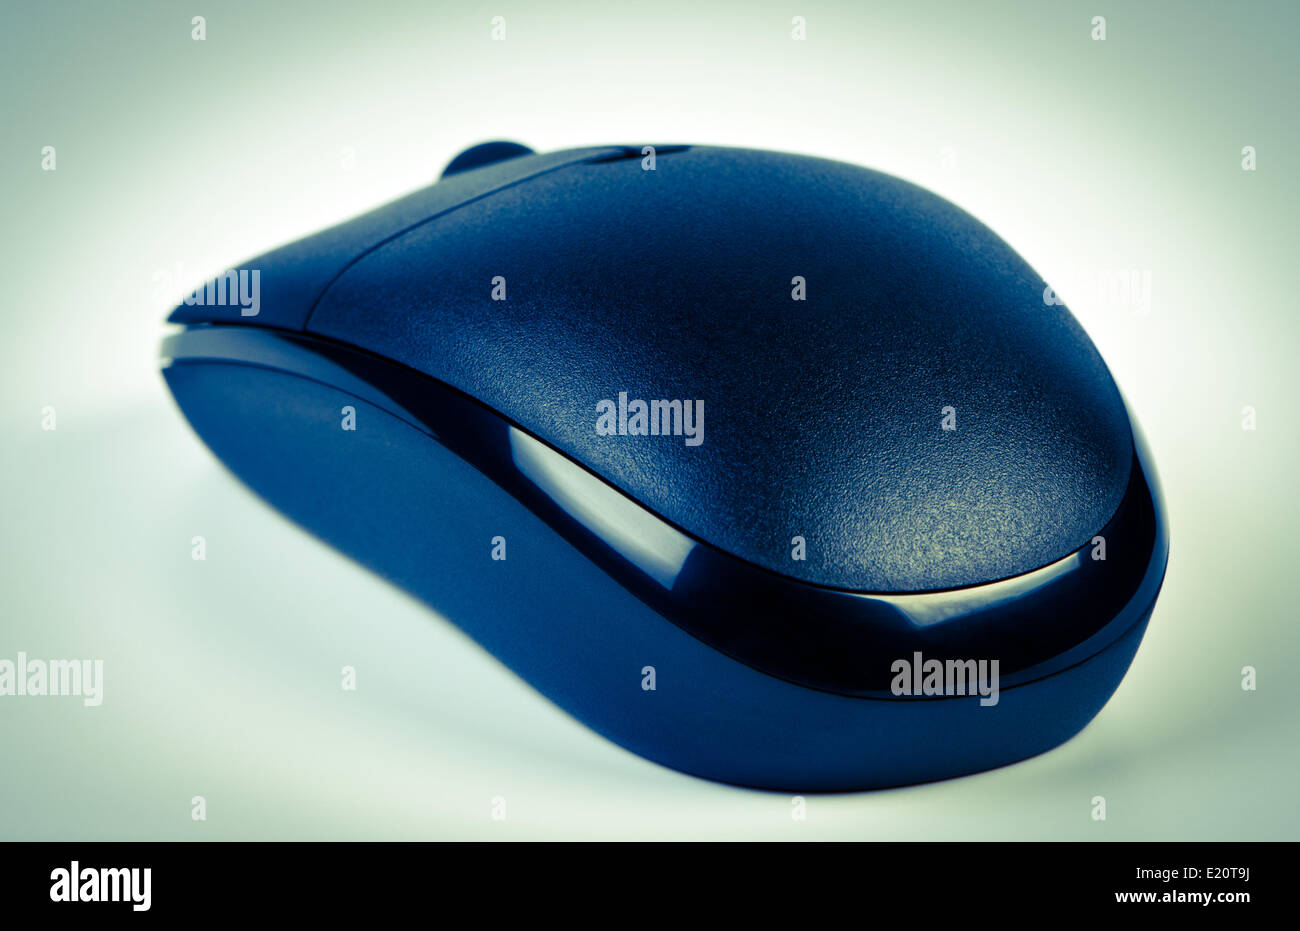 Computer mouse is a rear view. Stock Photo